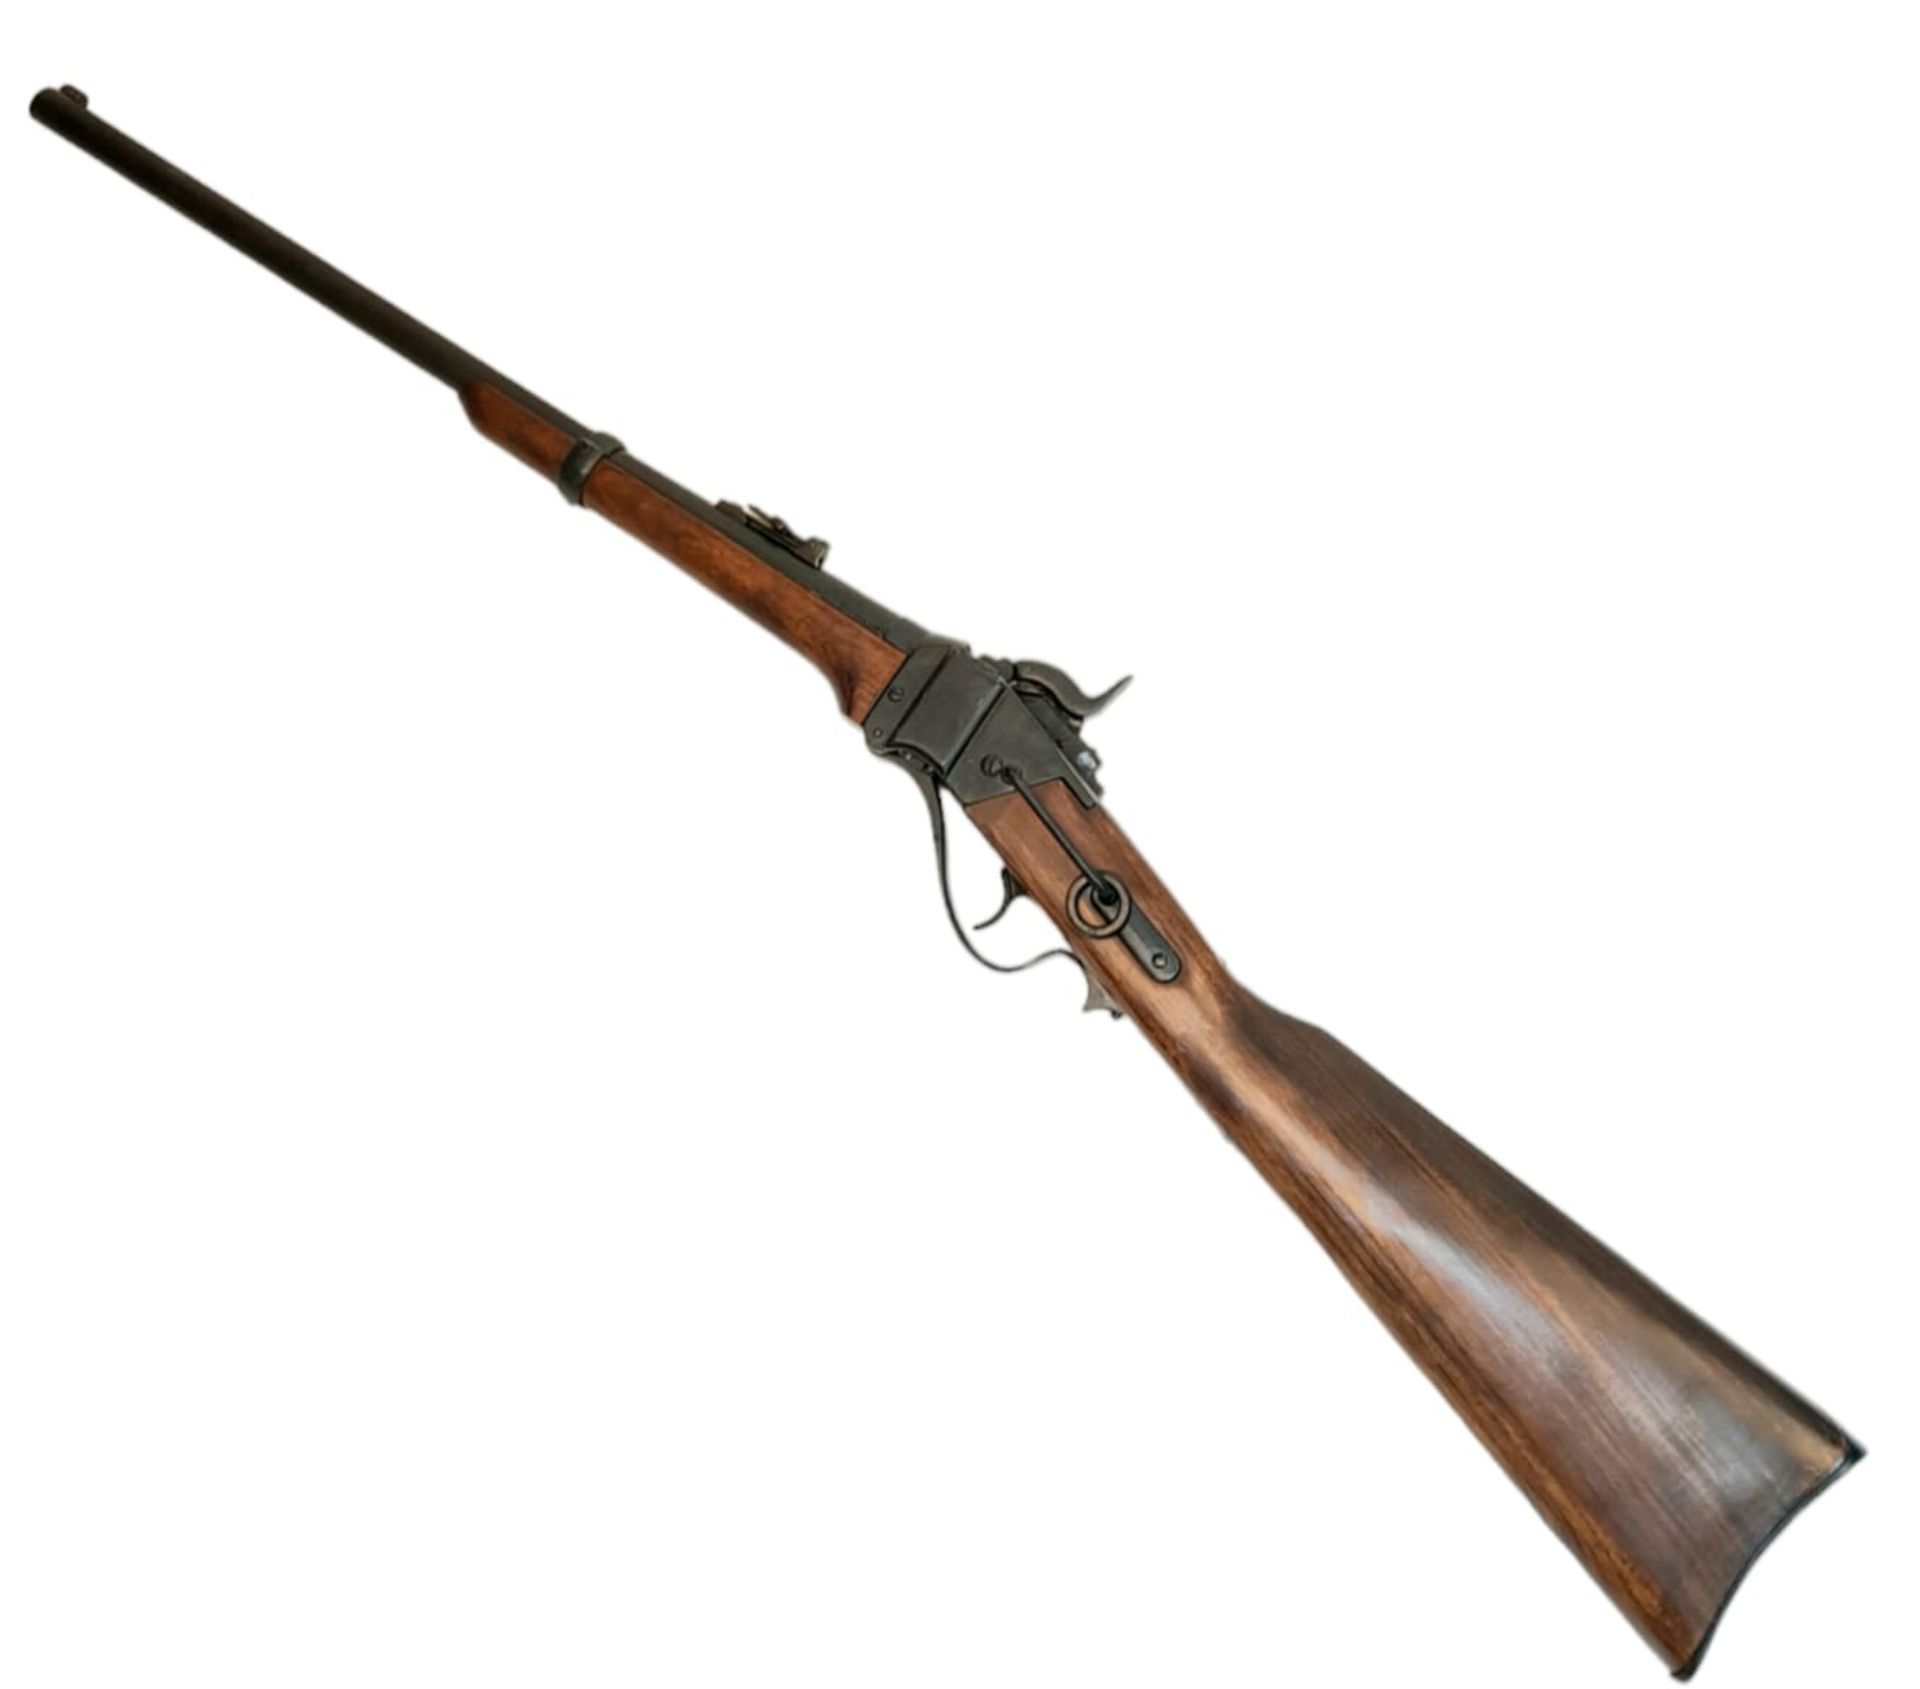 A Vintage, Full Weight and Size, Retrospective Inert Replica of an 1859 Carbine Rifle. Wood and